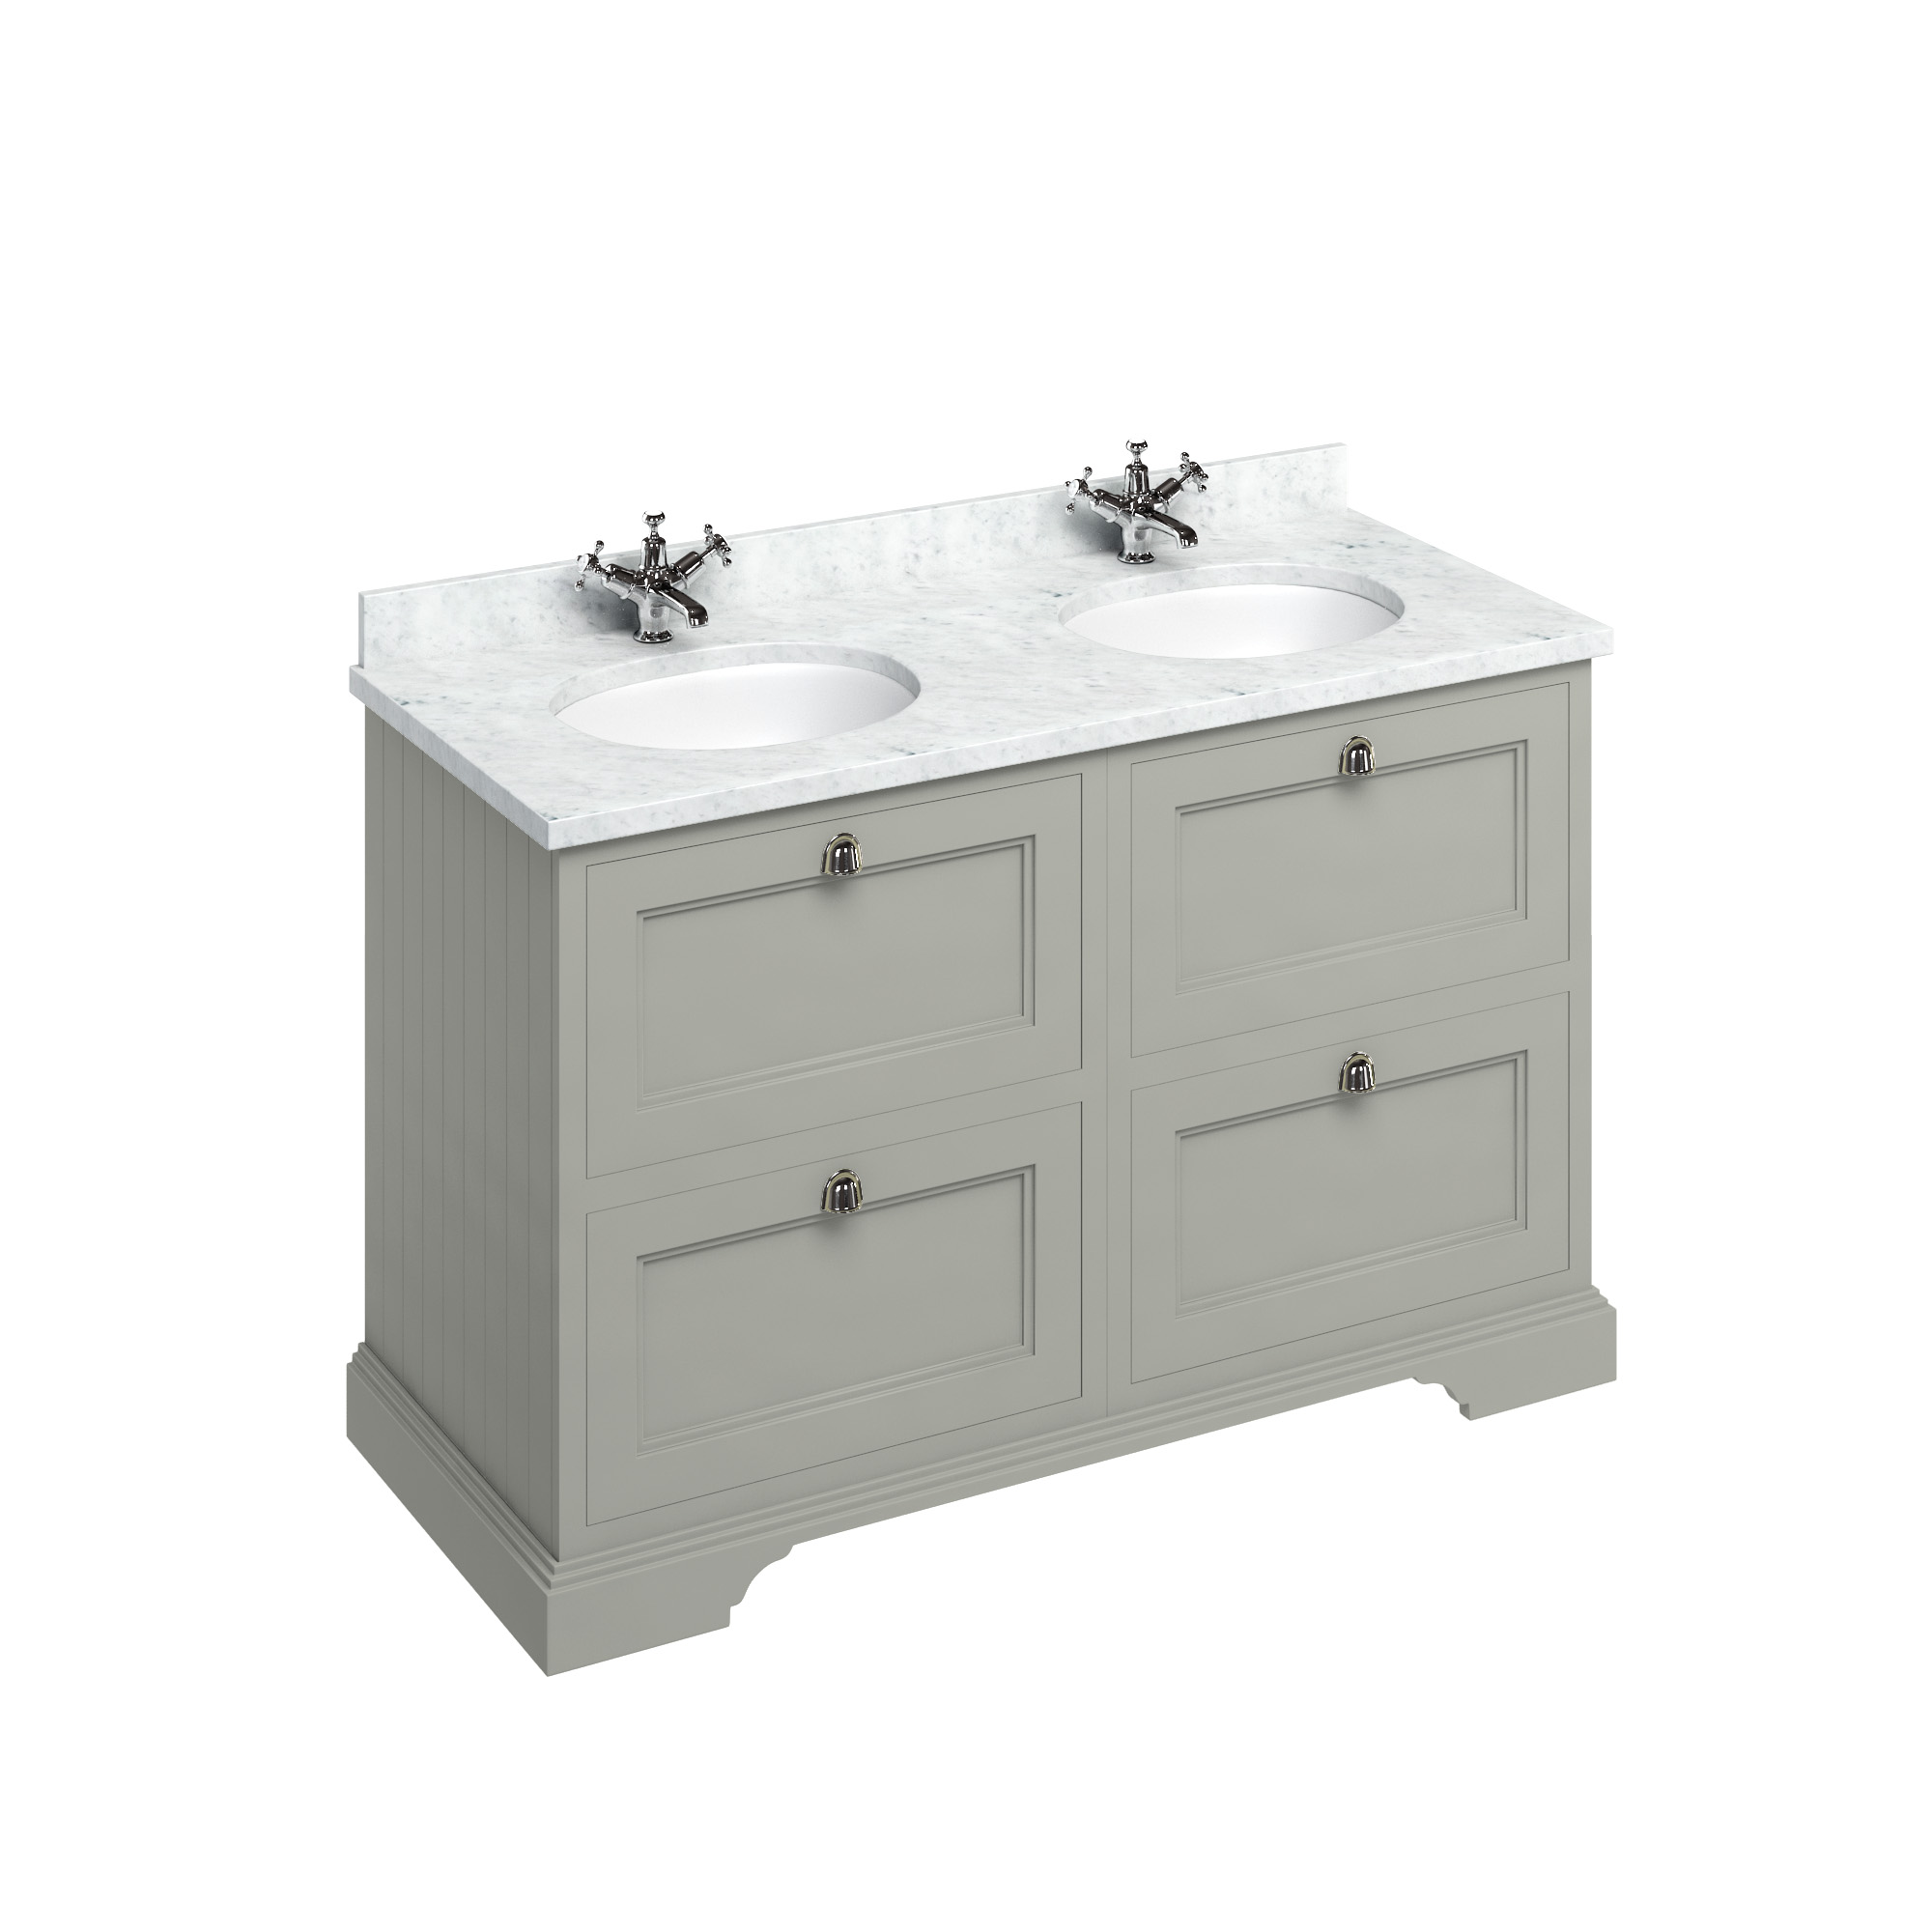 Freestanding 130 Vanity Unit with drawers - Dark Olive and Minerva Carrara white worktop with two integrated white basins